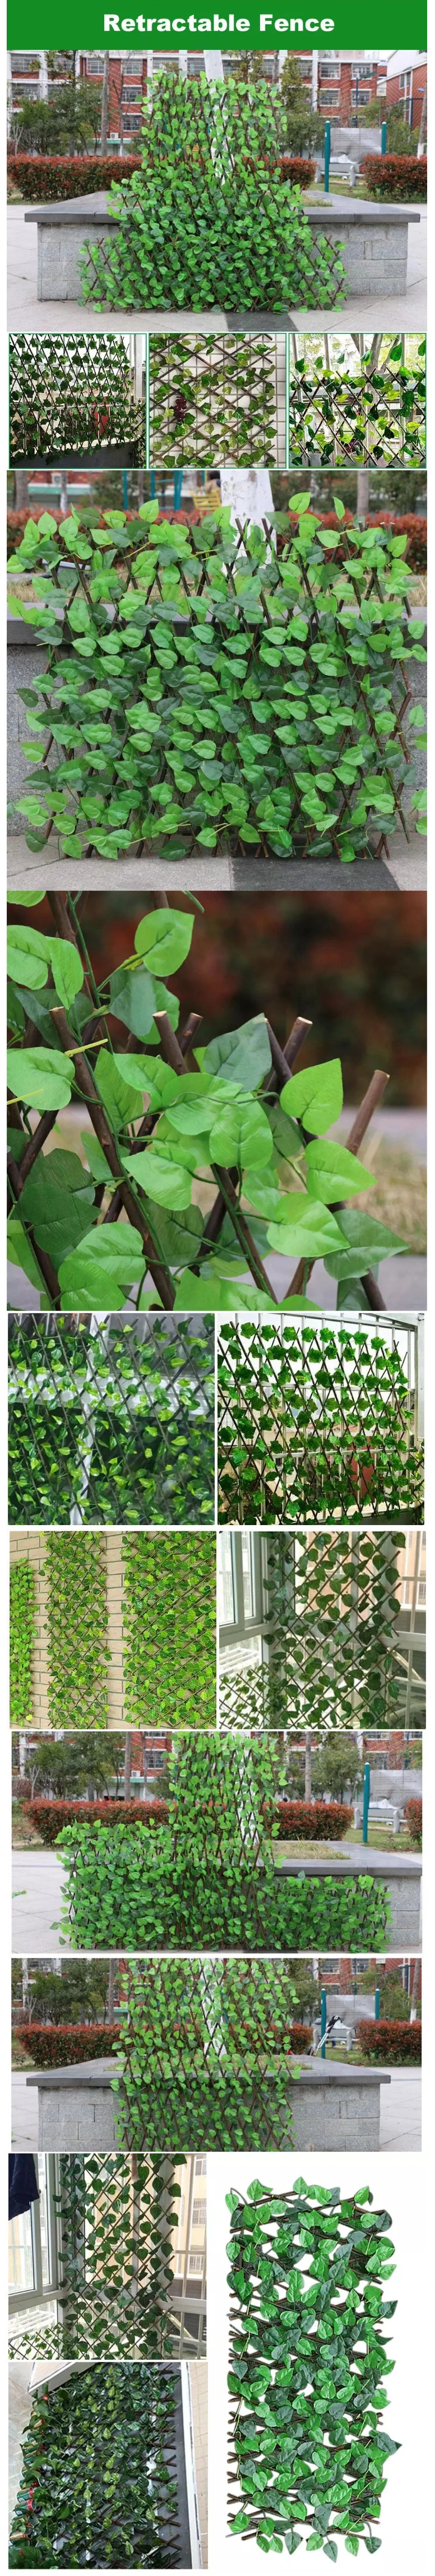 Artificial Outdoor Privacy Leaves Fence Decor Screen Greenery Fence